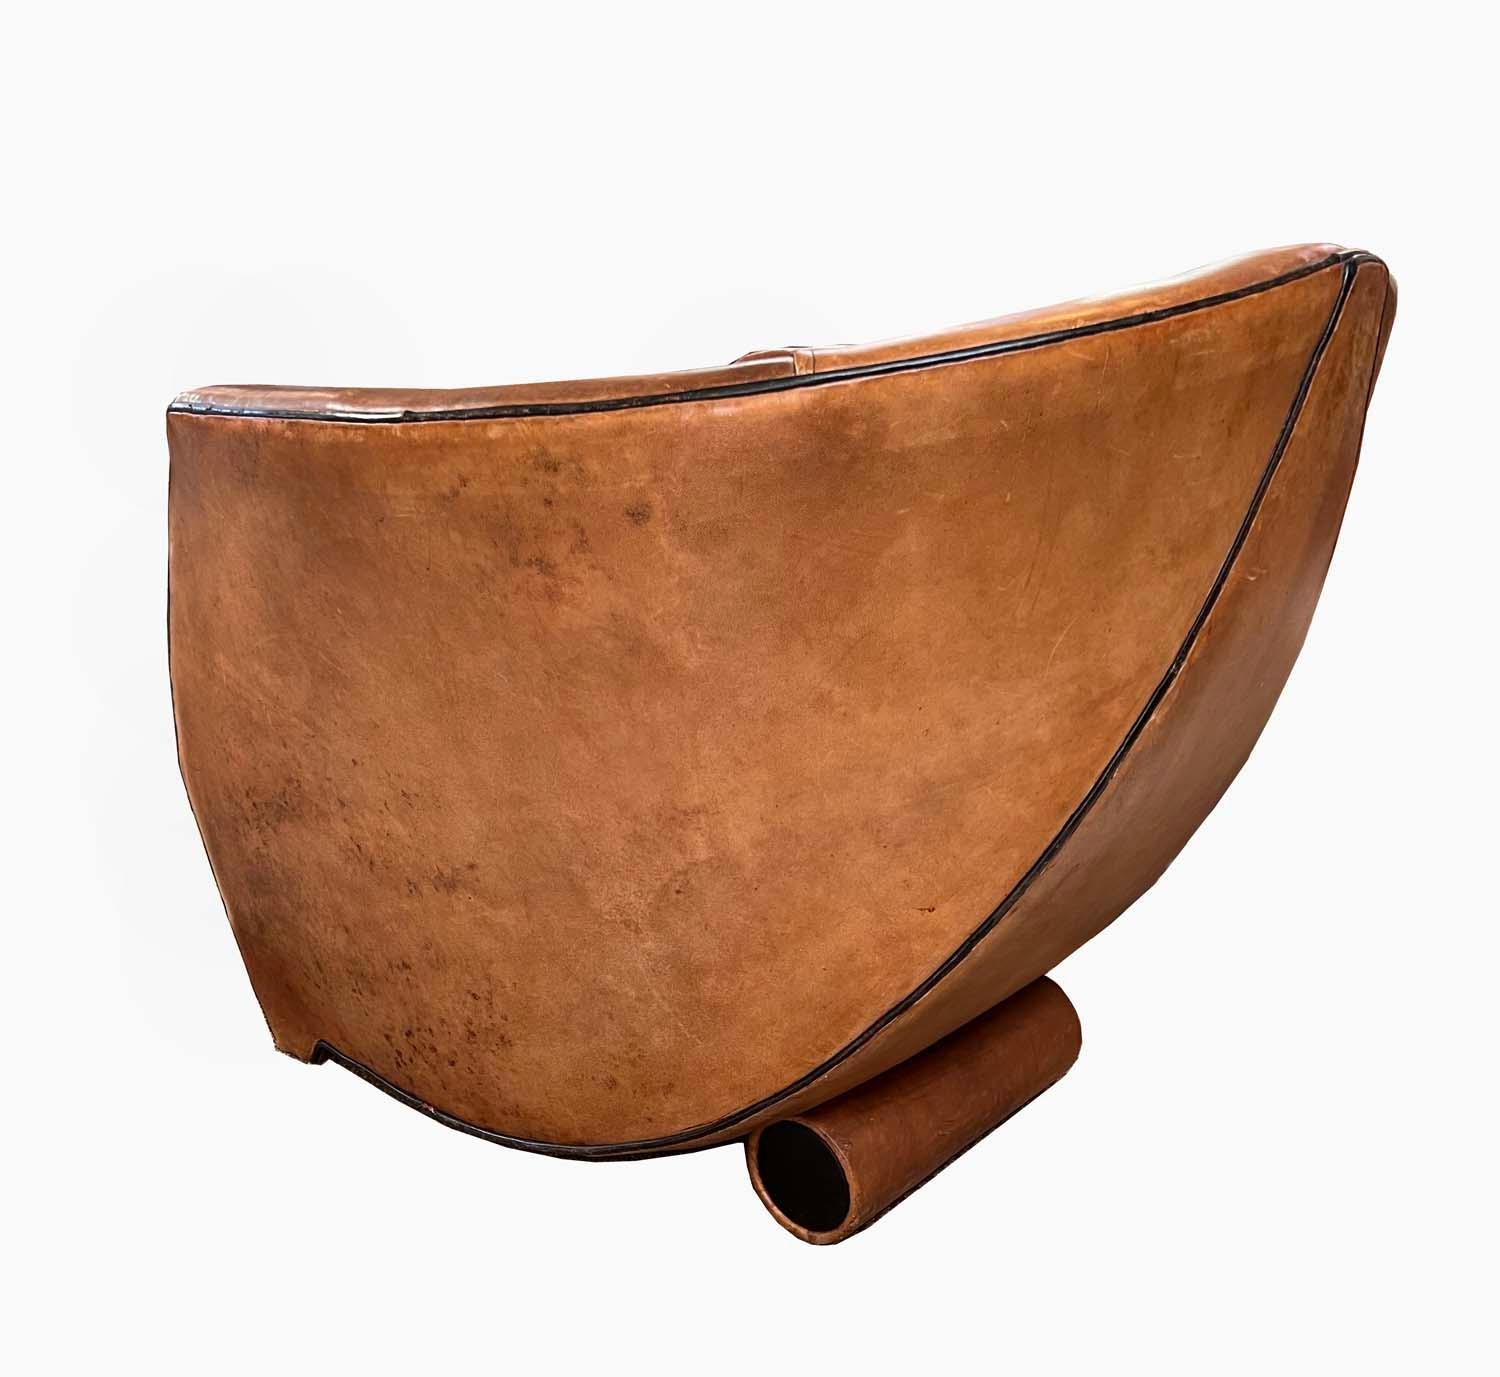 Pair of Bart Van Bekhoven, 'Cocoon' Lounge Chair, Leather, the Netherlands 3